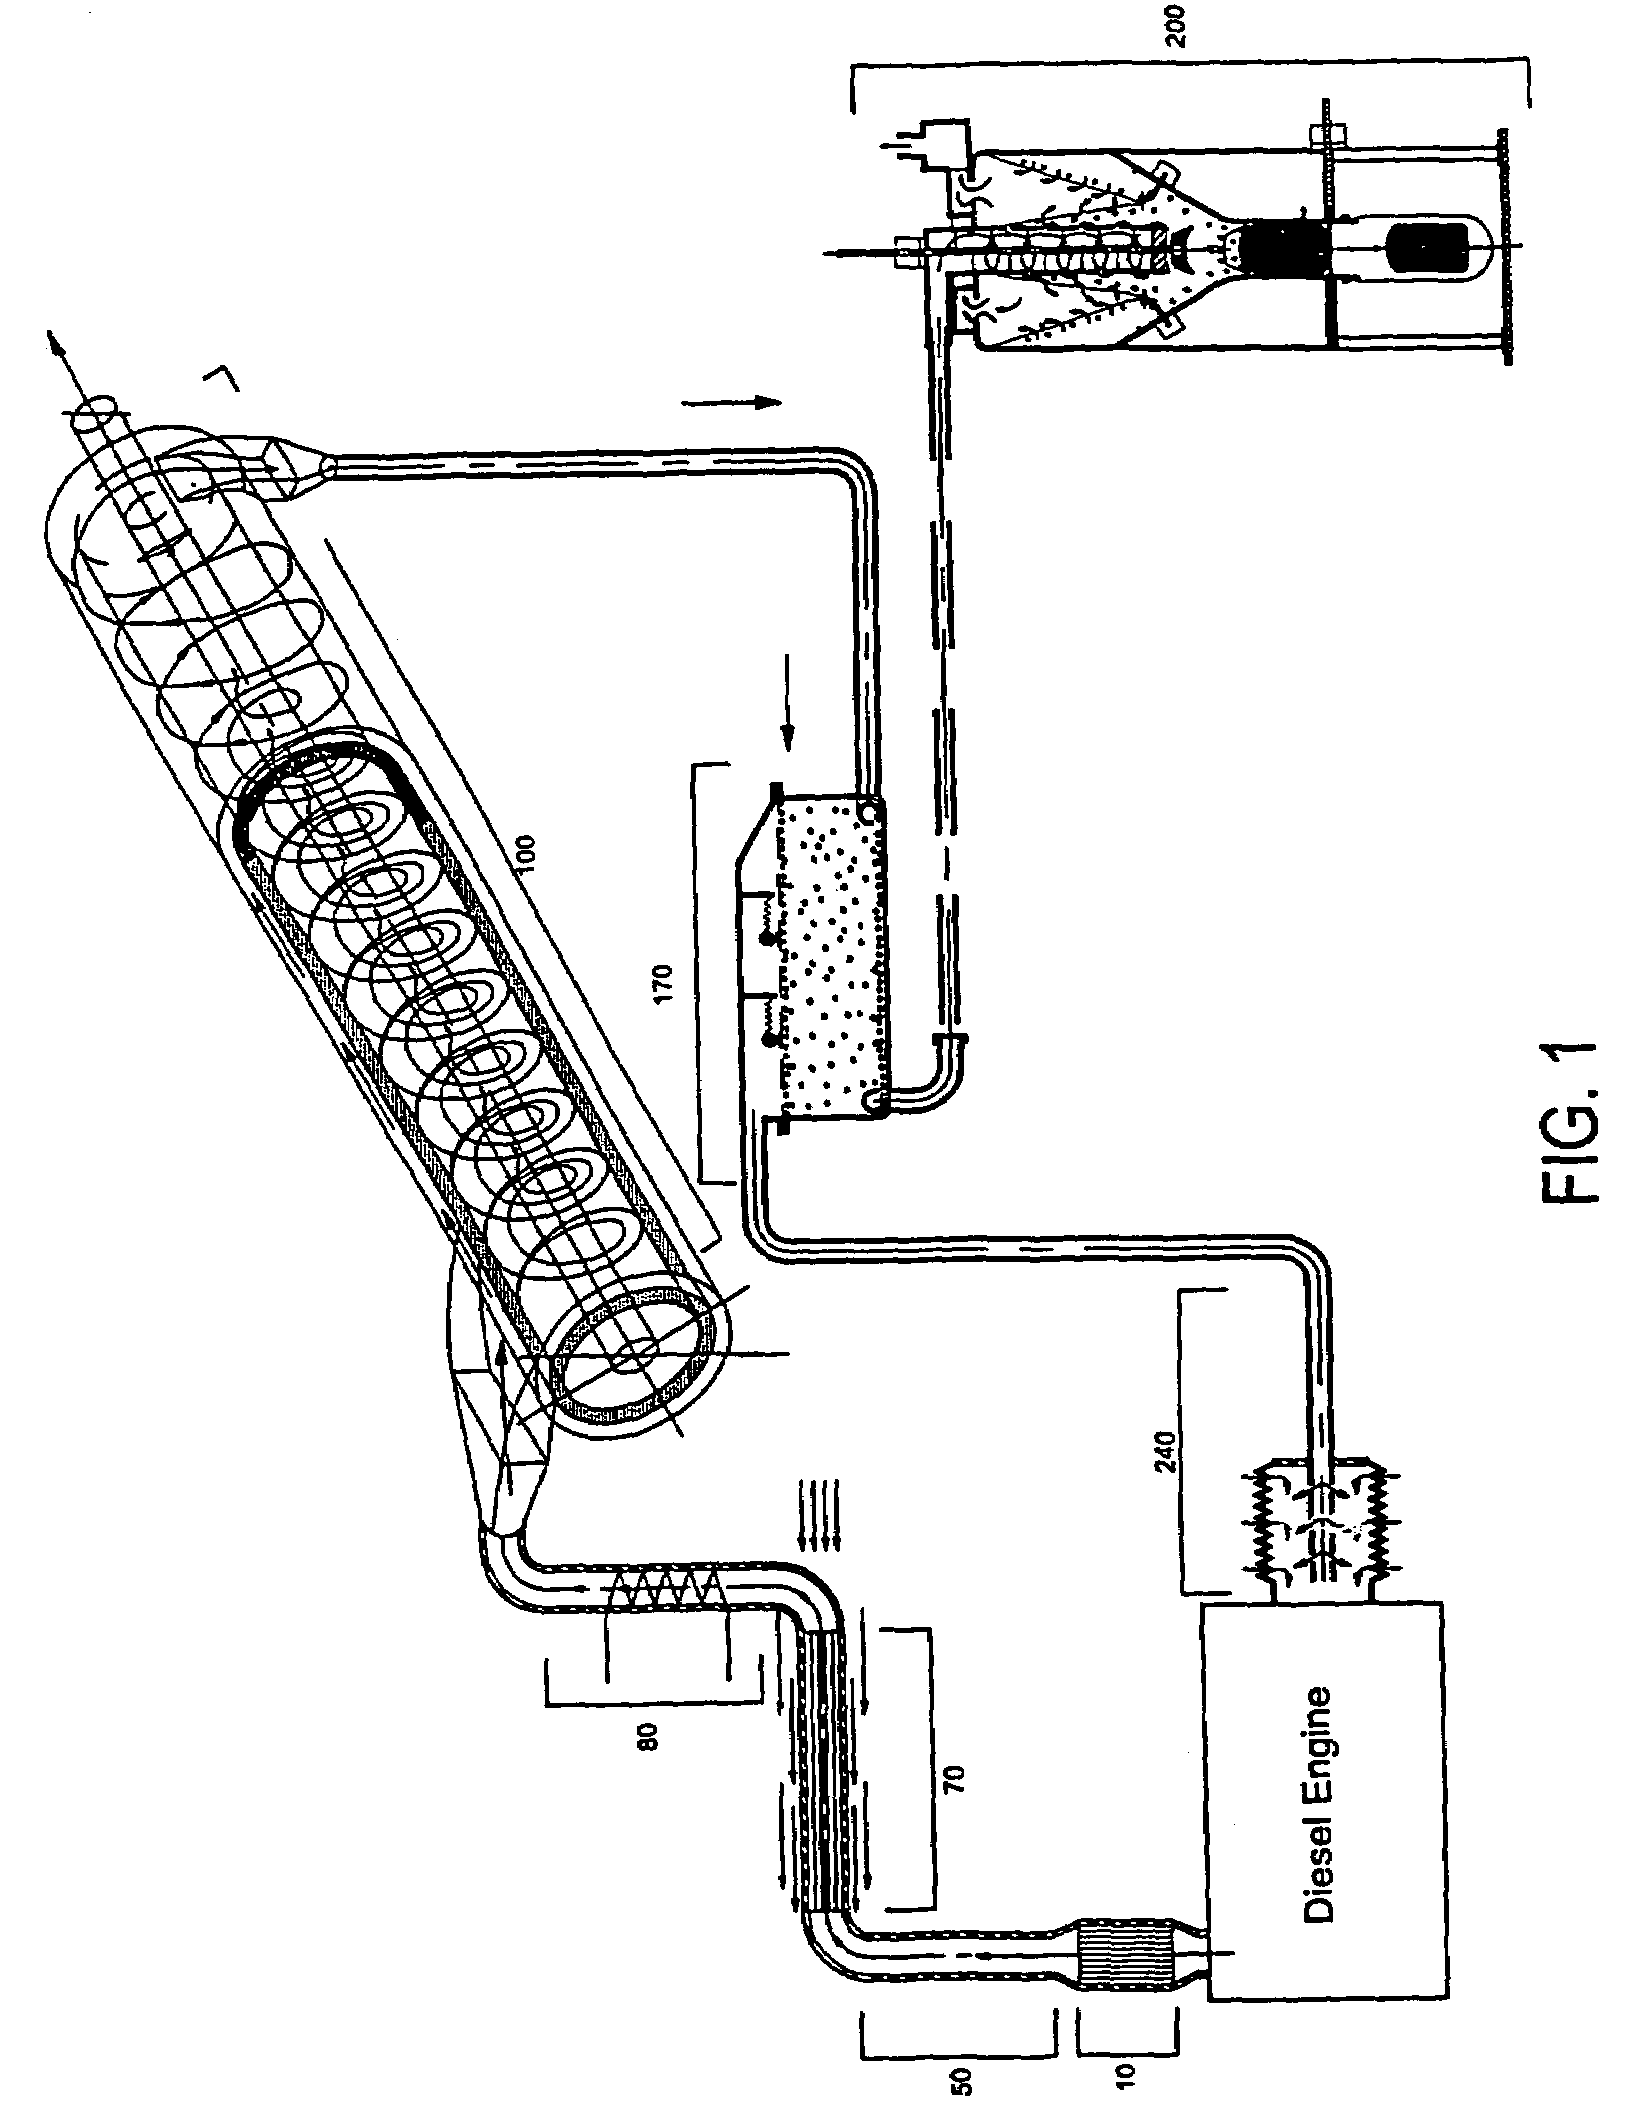 Exhaust after-treatment system for the reduction of pollutants from diesel engine exhaust and related method